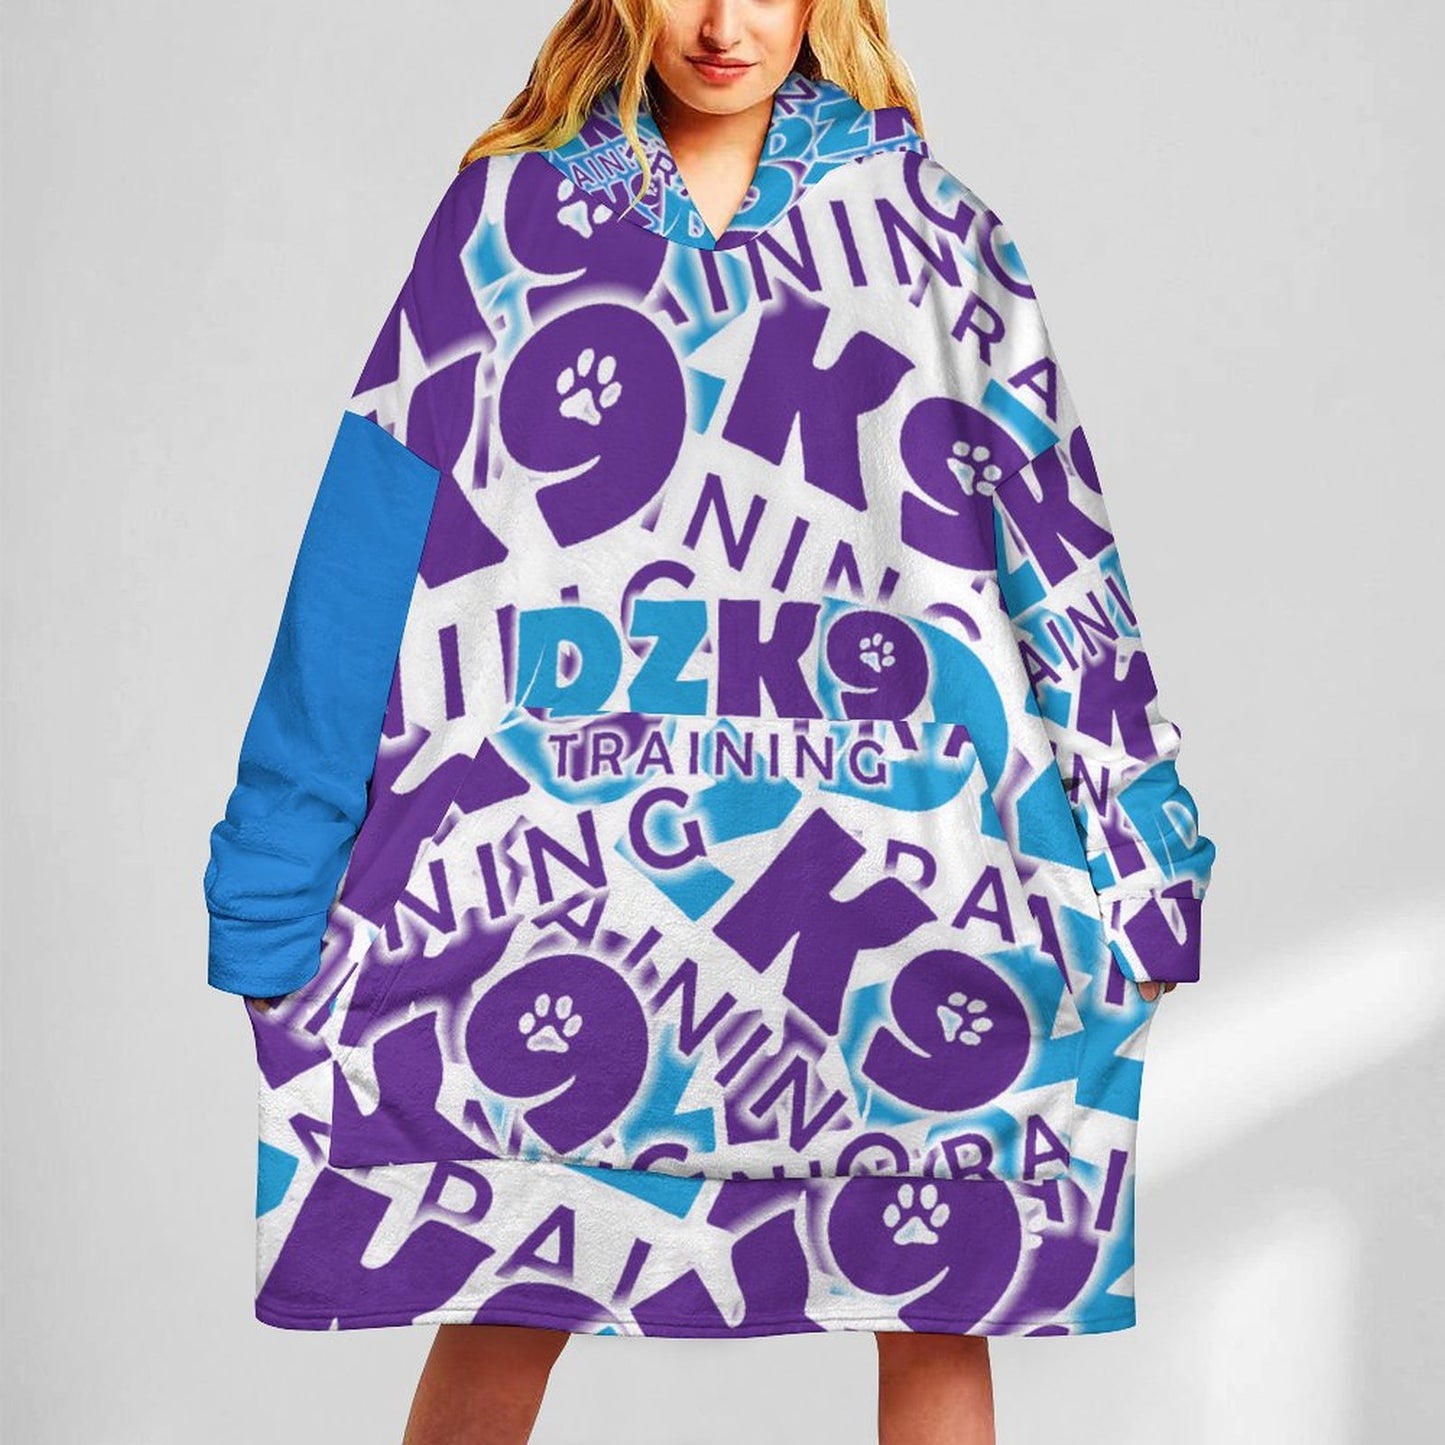 Wearable Sweater Blanket Oversize MTY01 (All-Over Printing)